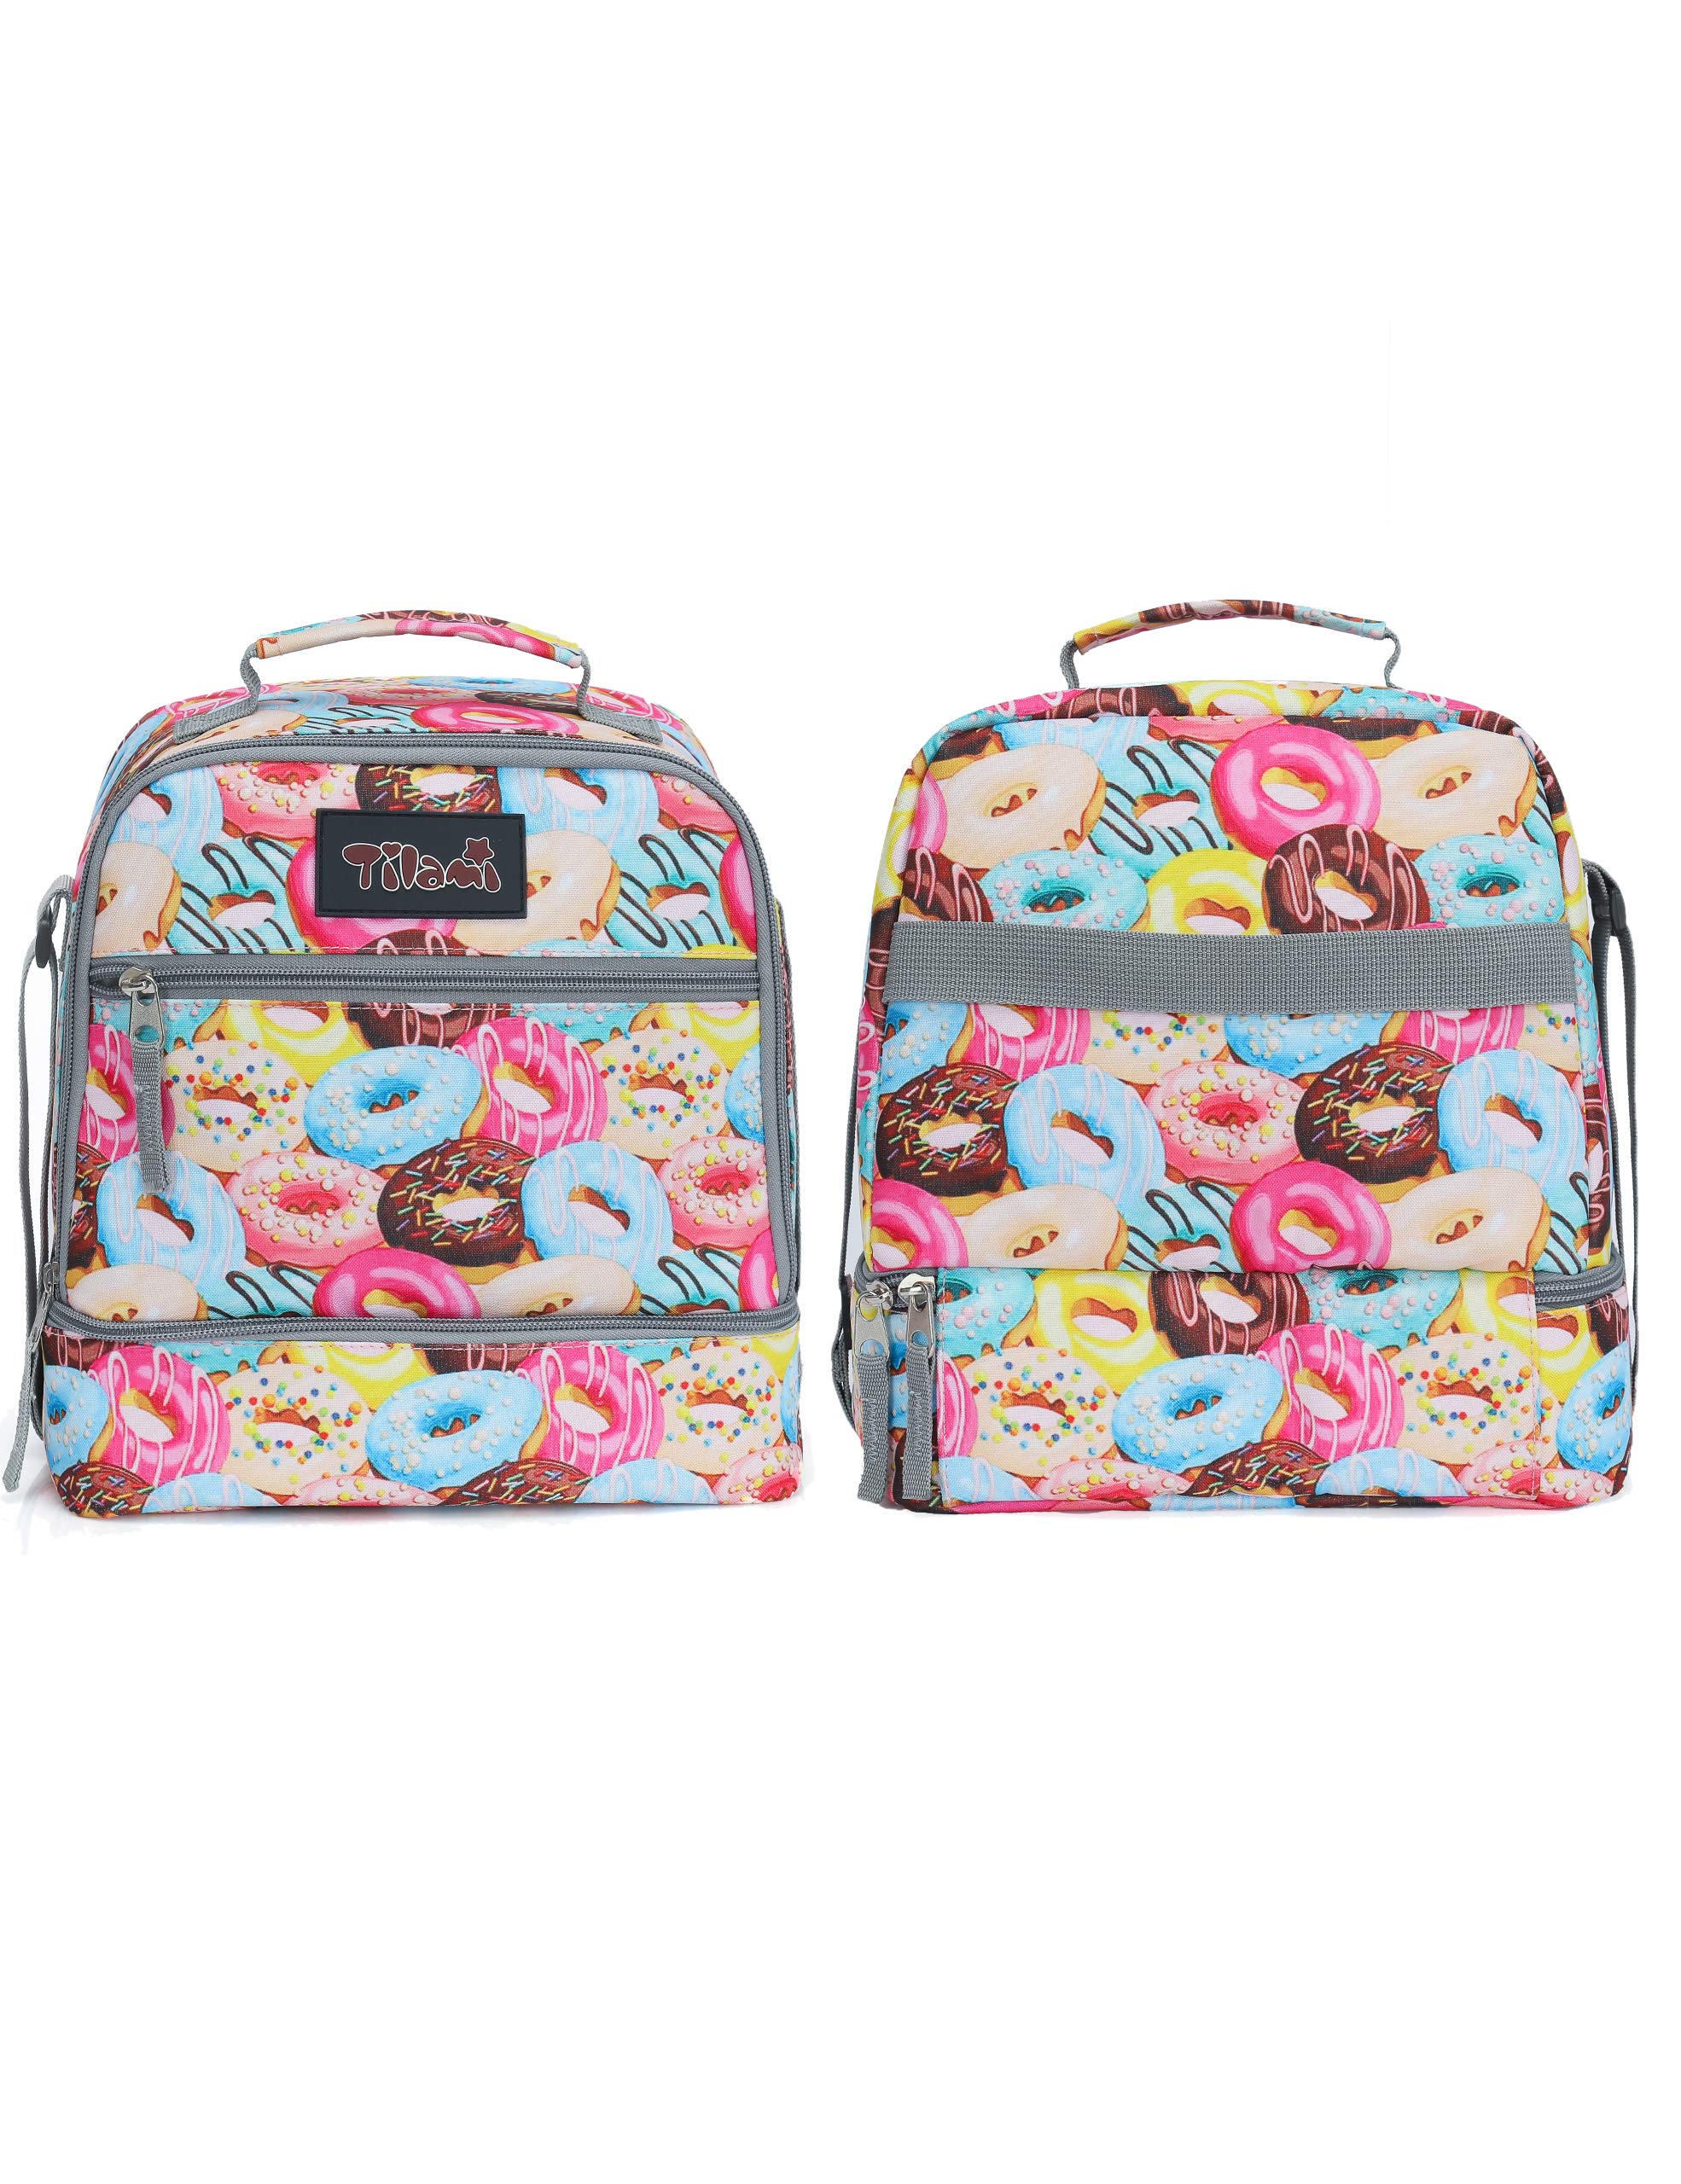 Tilami Rolling Backpack 19 inch with Lunch Bag Wheeled Laptop Backpack, Doughnut